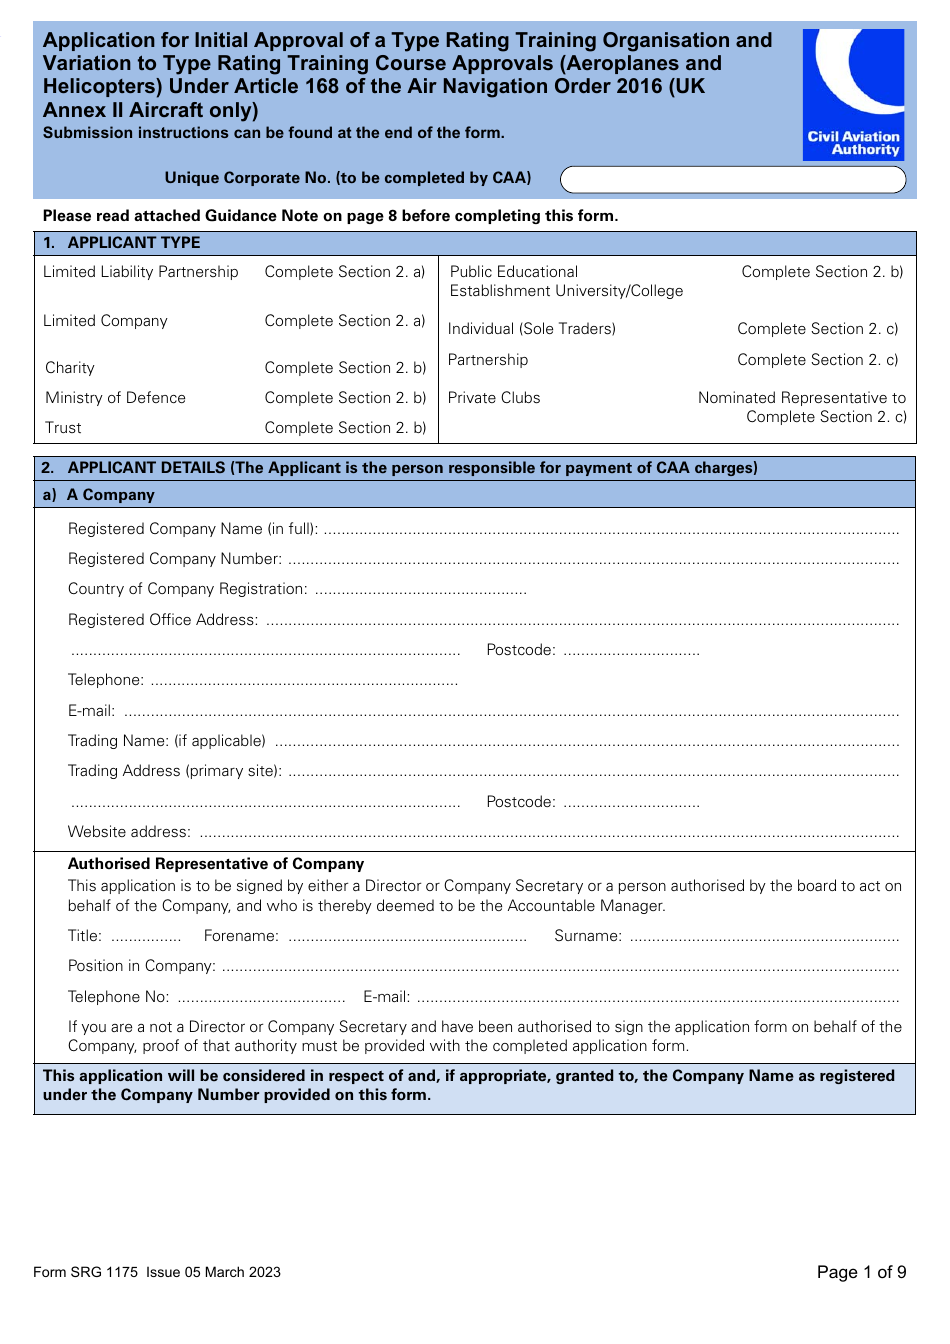 Form SRG1175 Application for Initial Approval of a Type Rating Training Organisation and Variation to Type Rating Training Course Approvals (Aeroplanes and Helicopters) Under Article 168 of the Air Navigation Order 2016 (UK Annex II Aircraft Only) - United Kingdom, Page 1